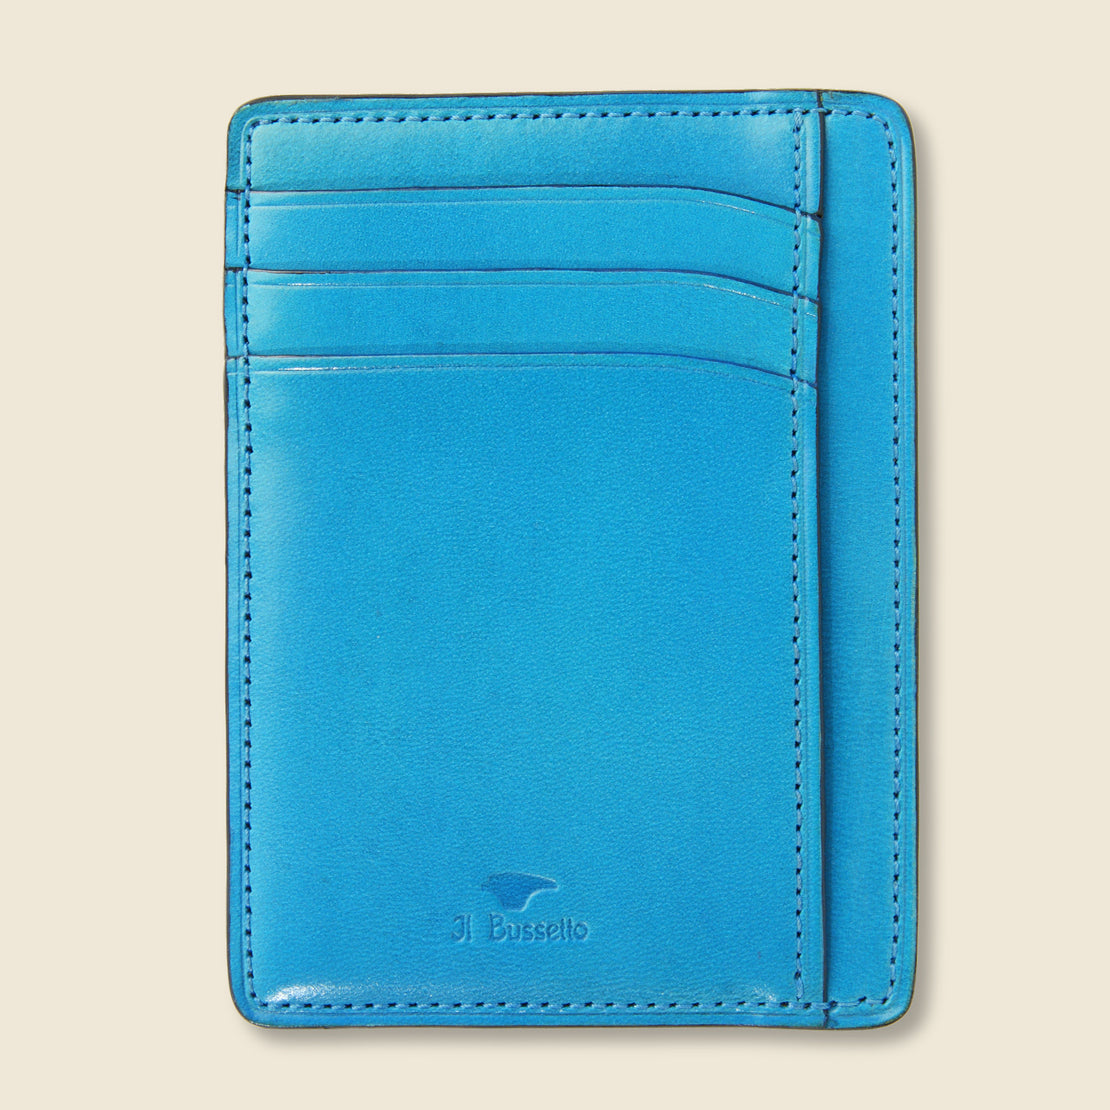 Il Bussetto Card and Document Case - Cadet Blue